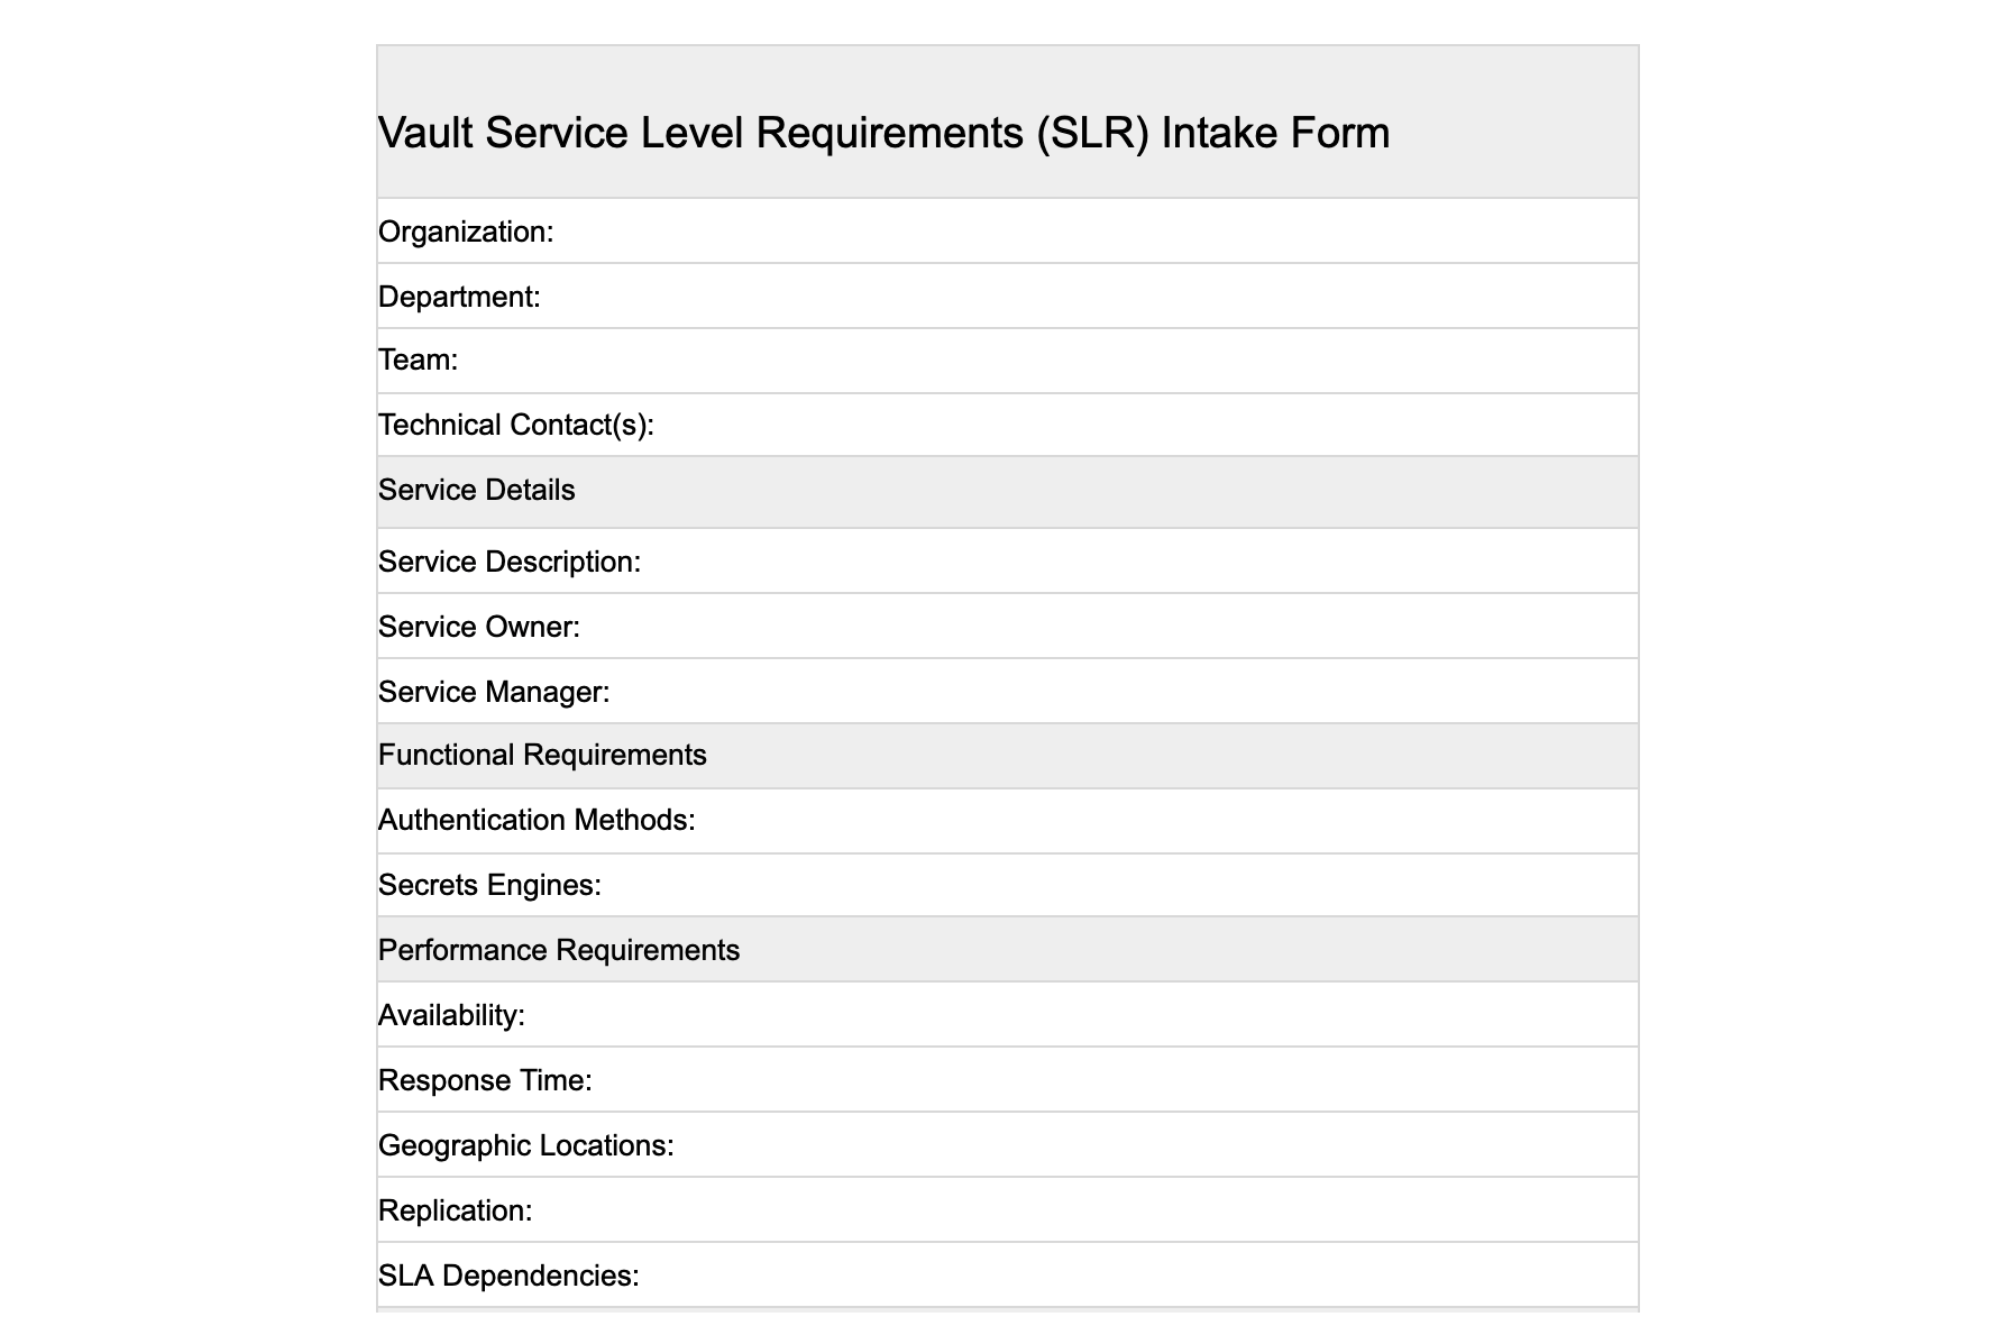 Vault service level requirements intake form